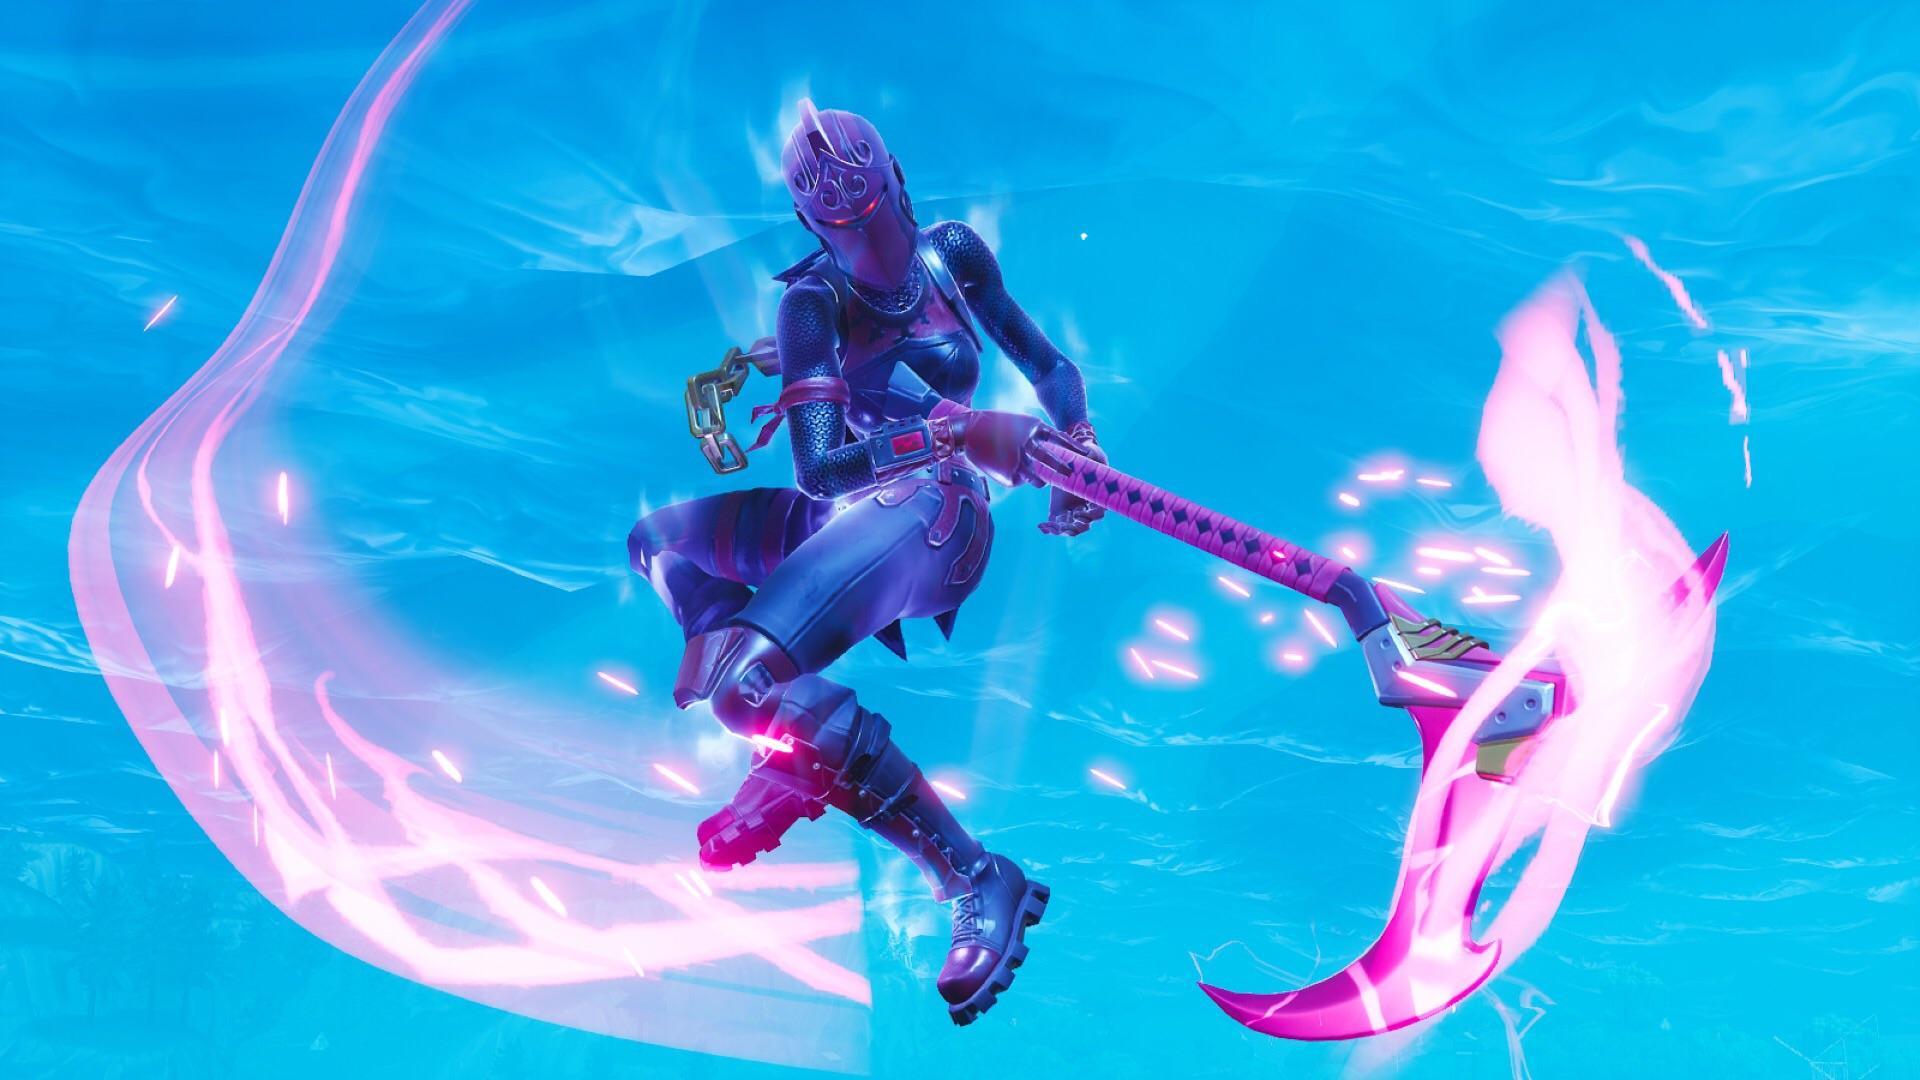 Thought this screenshot of Red Knight w/ Rift Edge looked